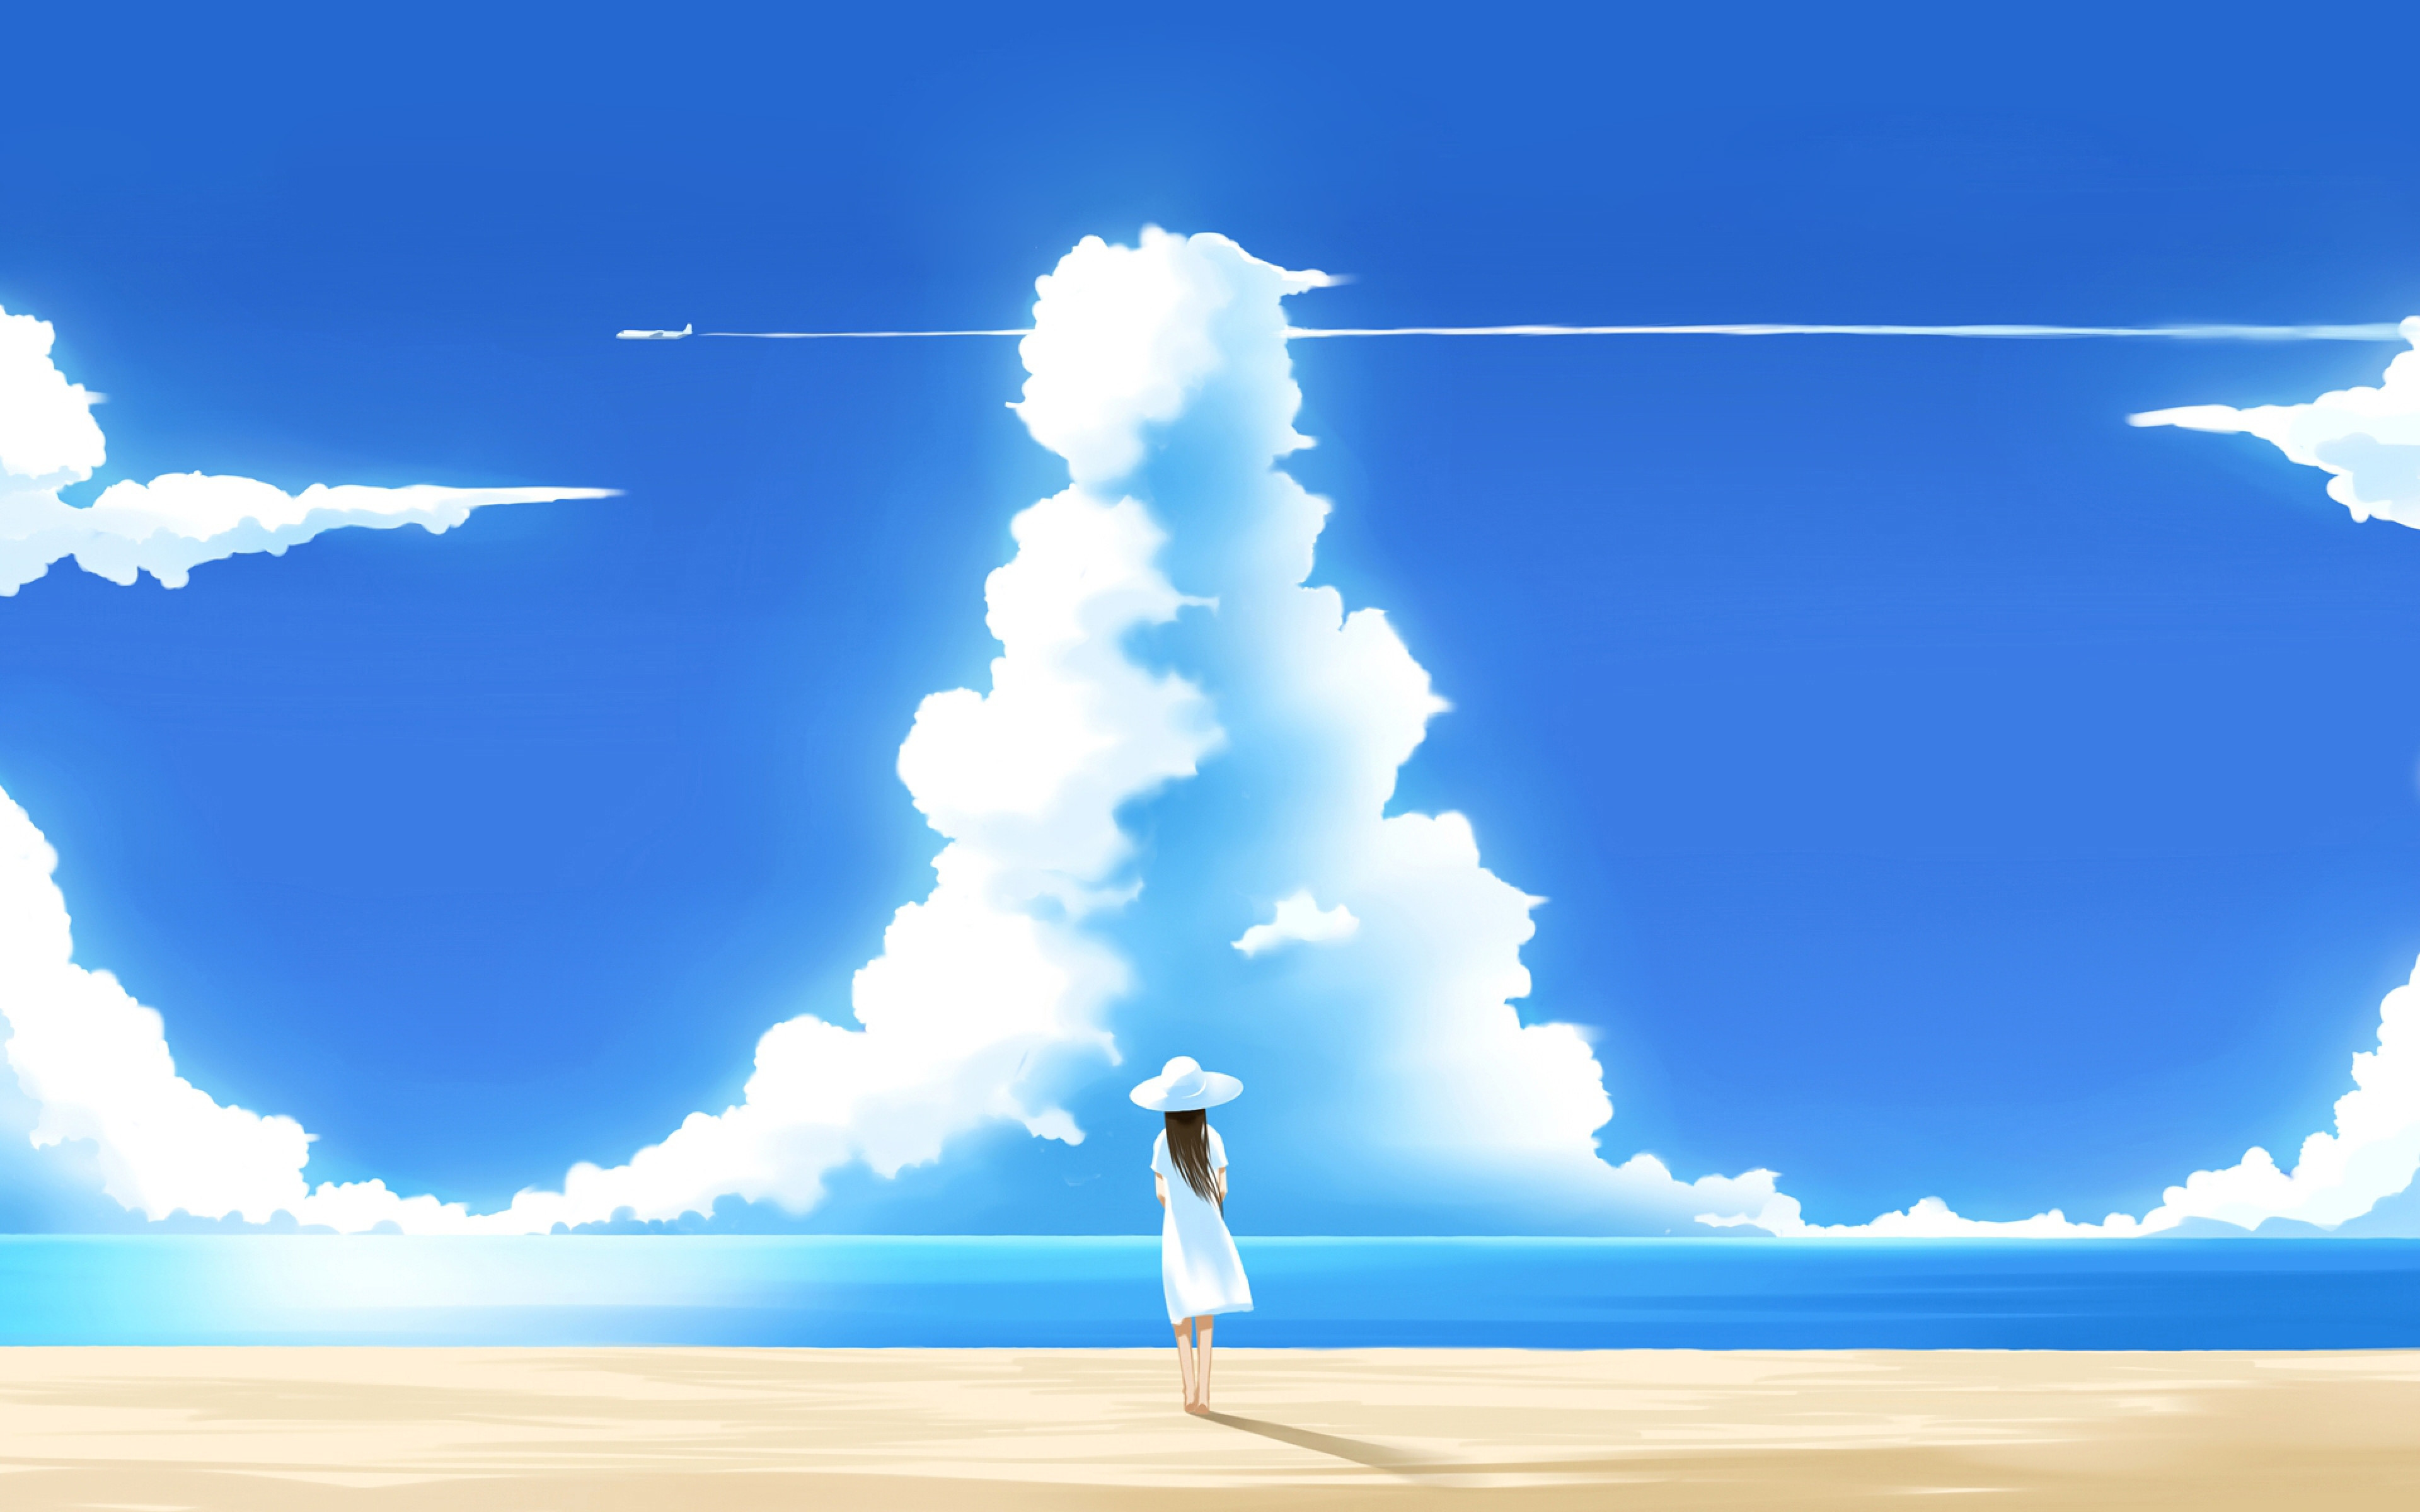 Anime Scenery Wallpapers for Computer 2714 - HD Wallpaper Site